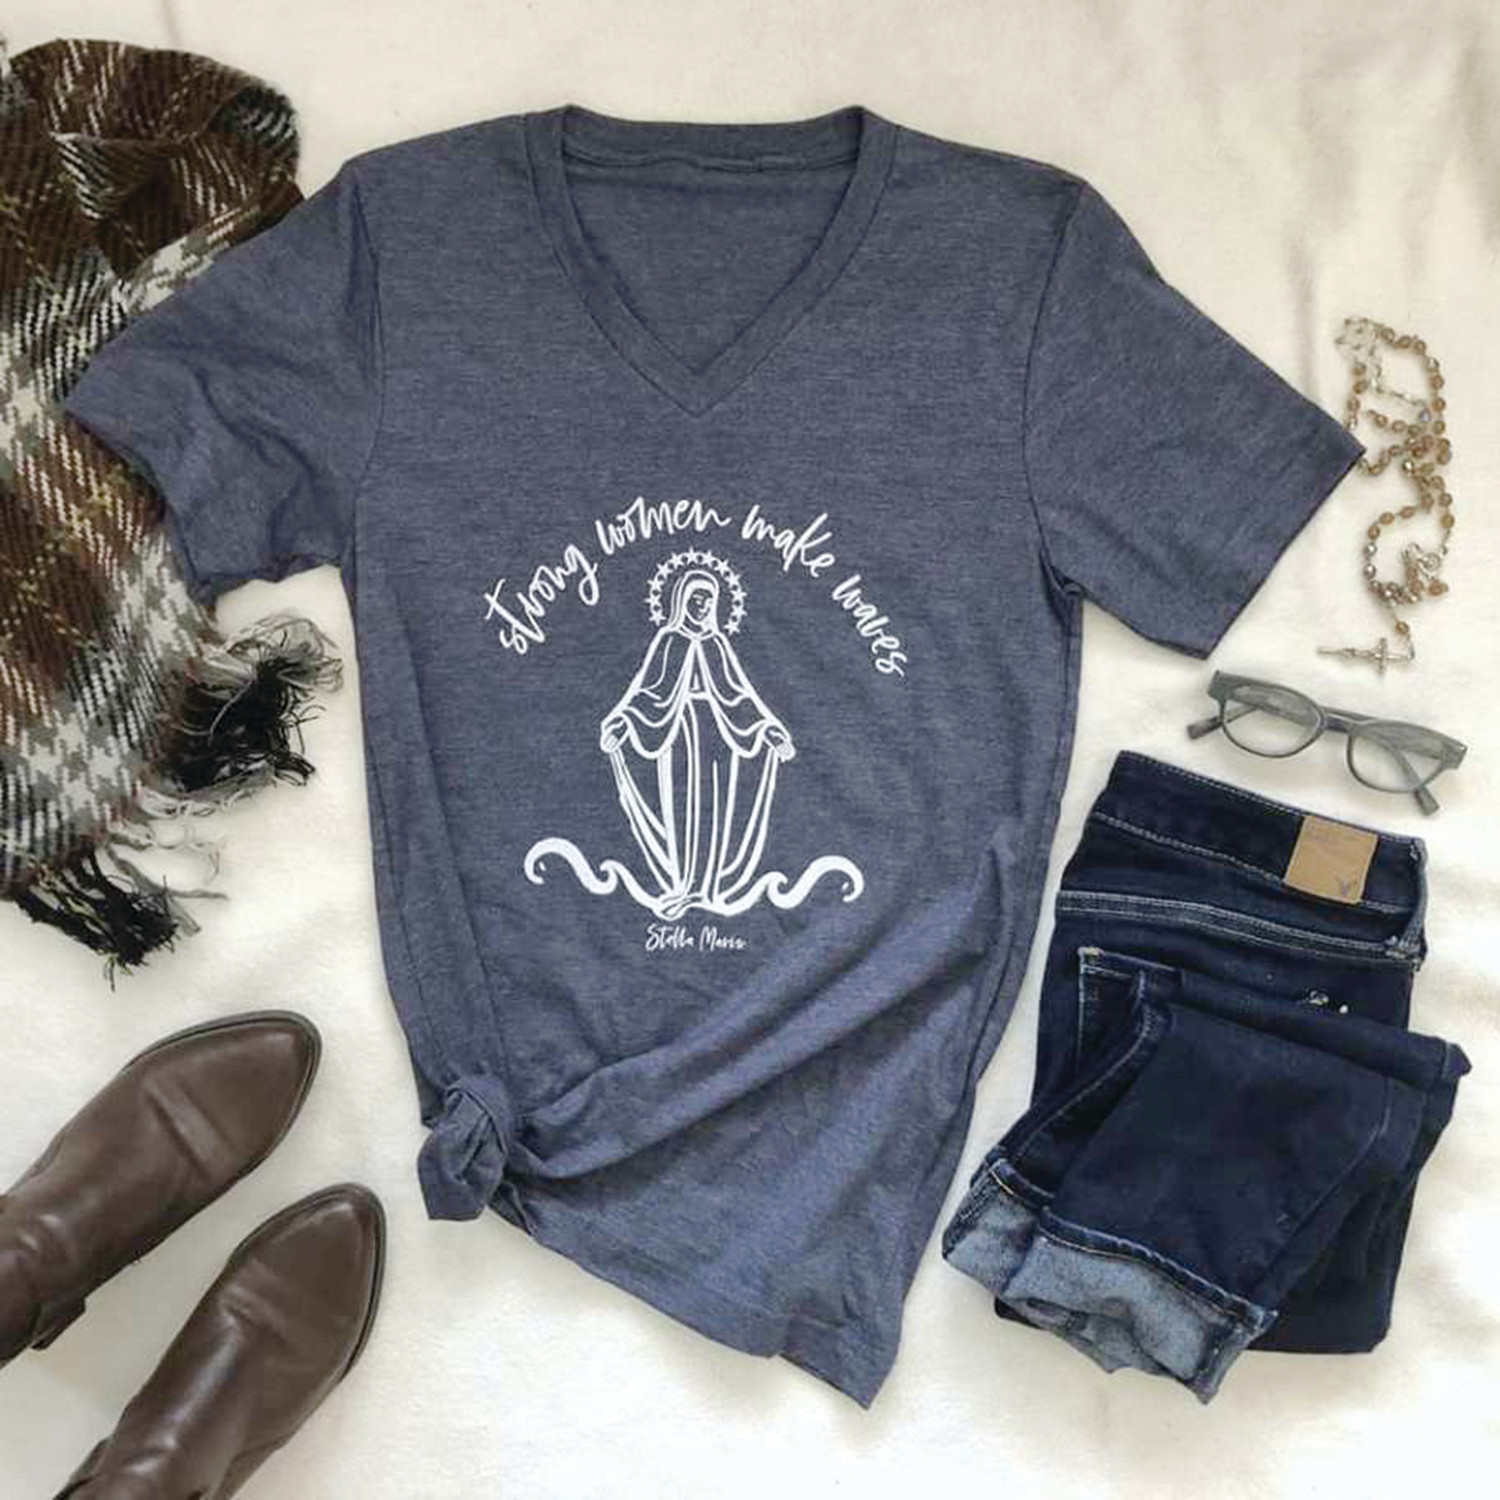 A shirt design by Lauren Winter pays tribute to the Blessed Mother’s life and example. “She made a tidal wave so grand that its ripple effects have lasted for millenniums and will continue to for all eternity,” said Winter.